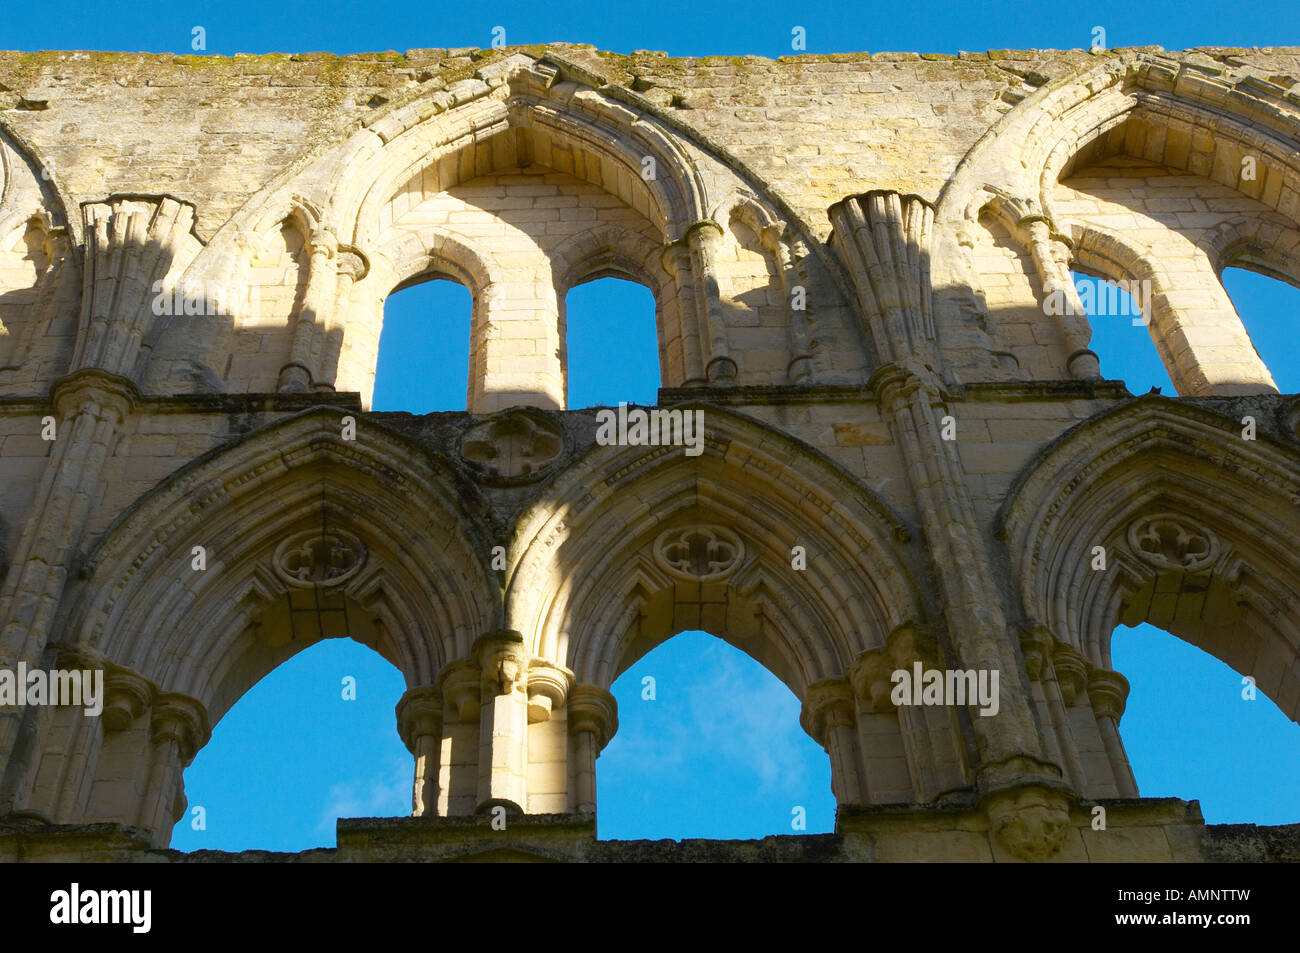 End of abbey with gothic arches. English Heritage site. Rievaulx Abbey, North Yorkshire National Park, England Stock Photo